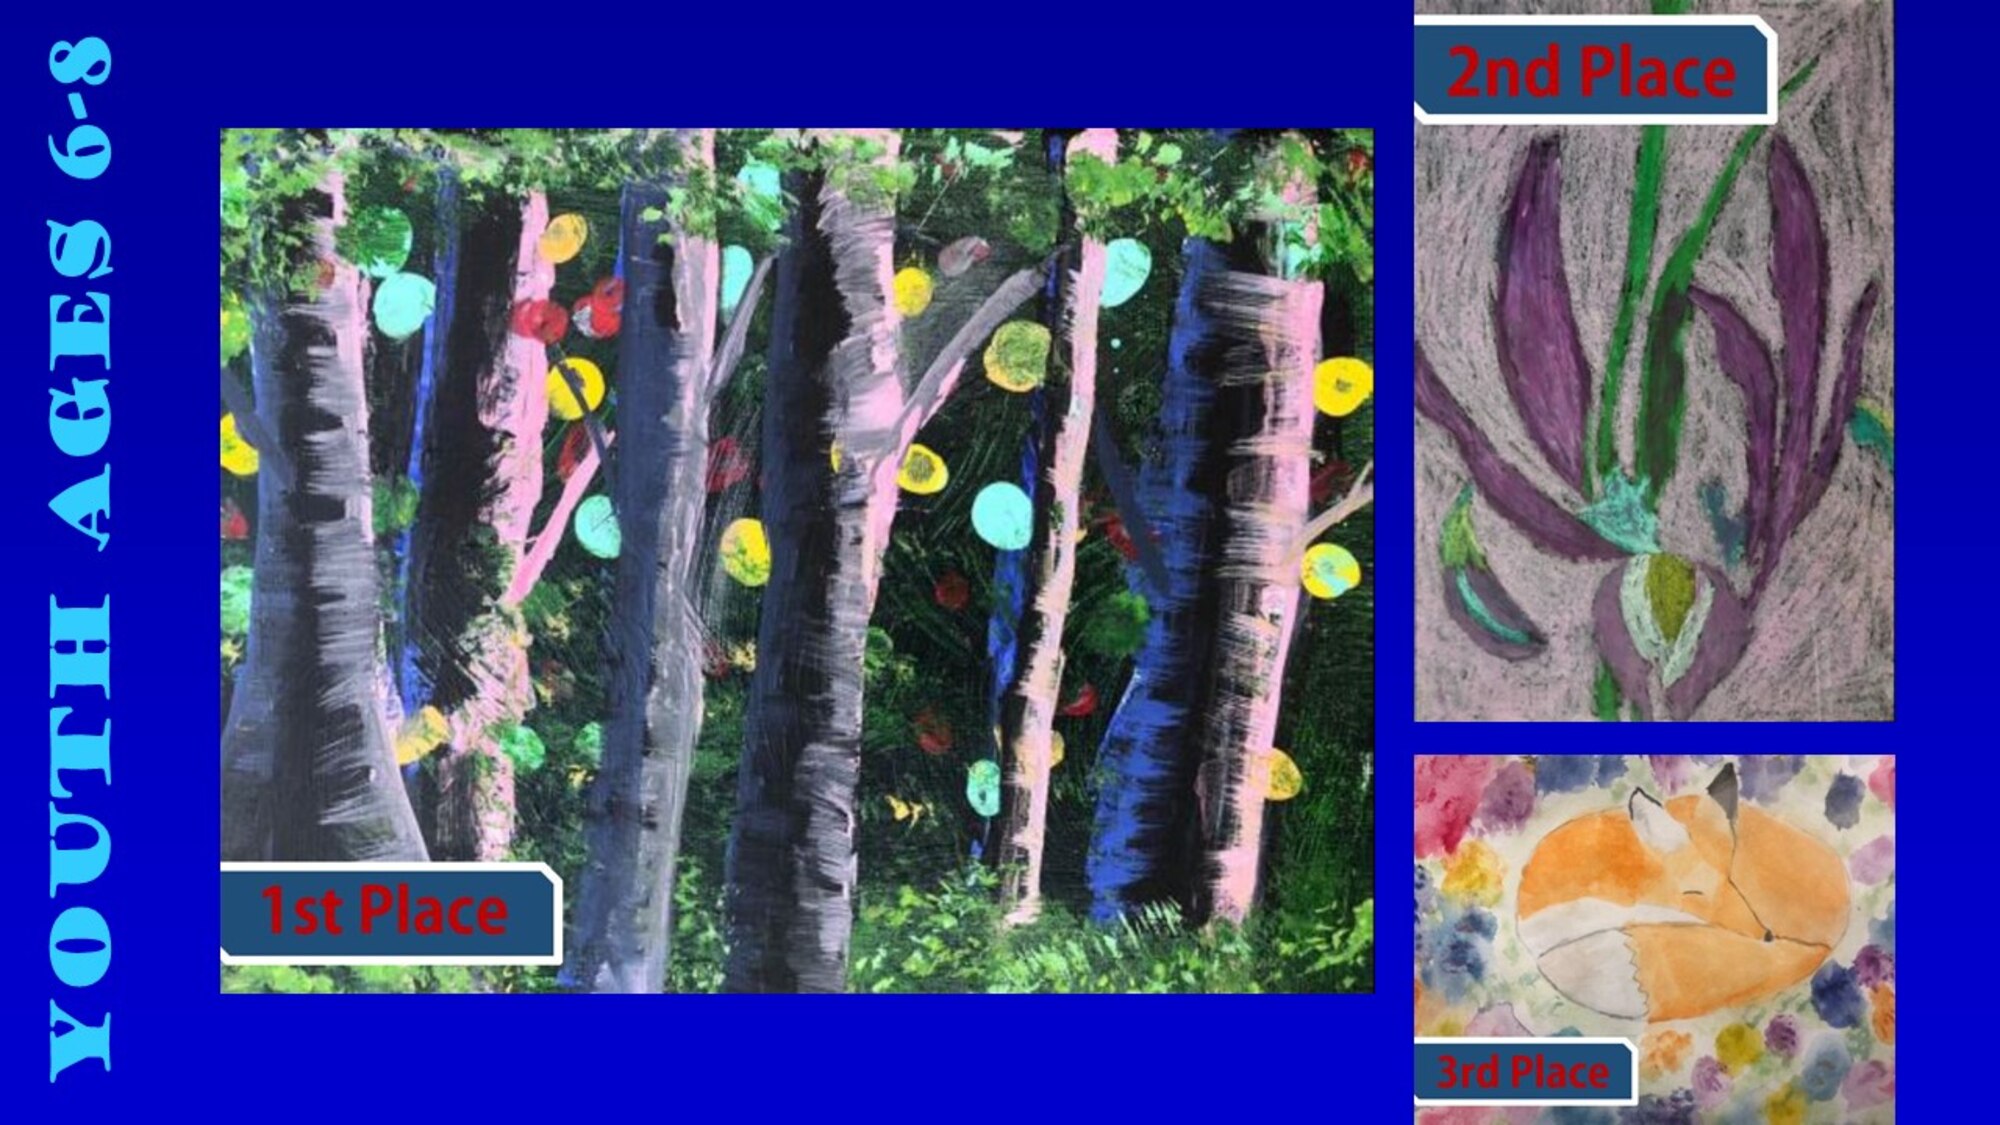 Congratulations to the 2019 Air Force Art Contest winners, ages 6-8. (U.S. Air Force graphic using winning art work)